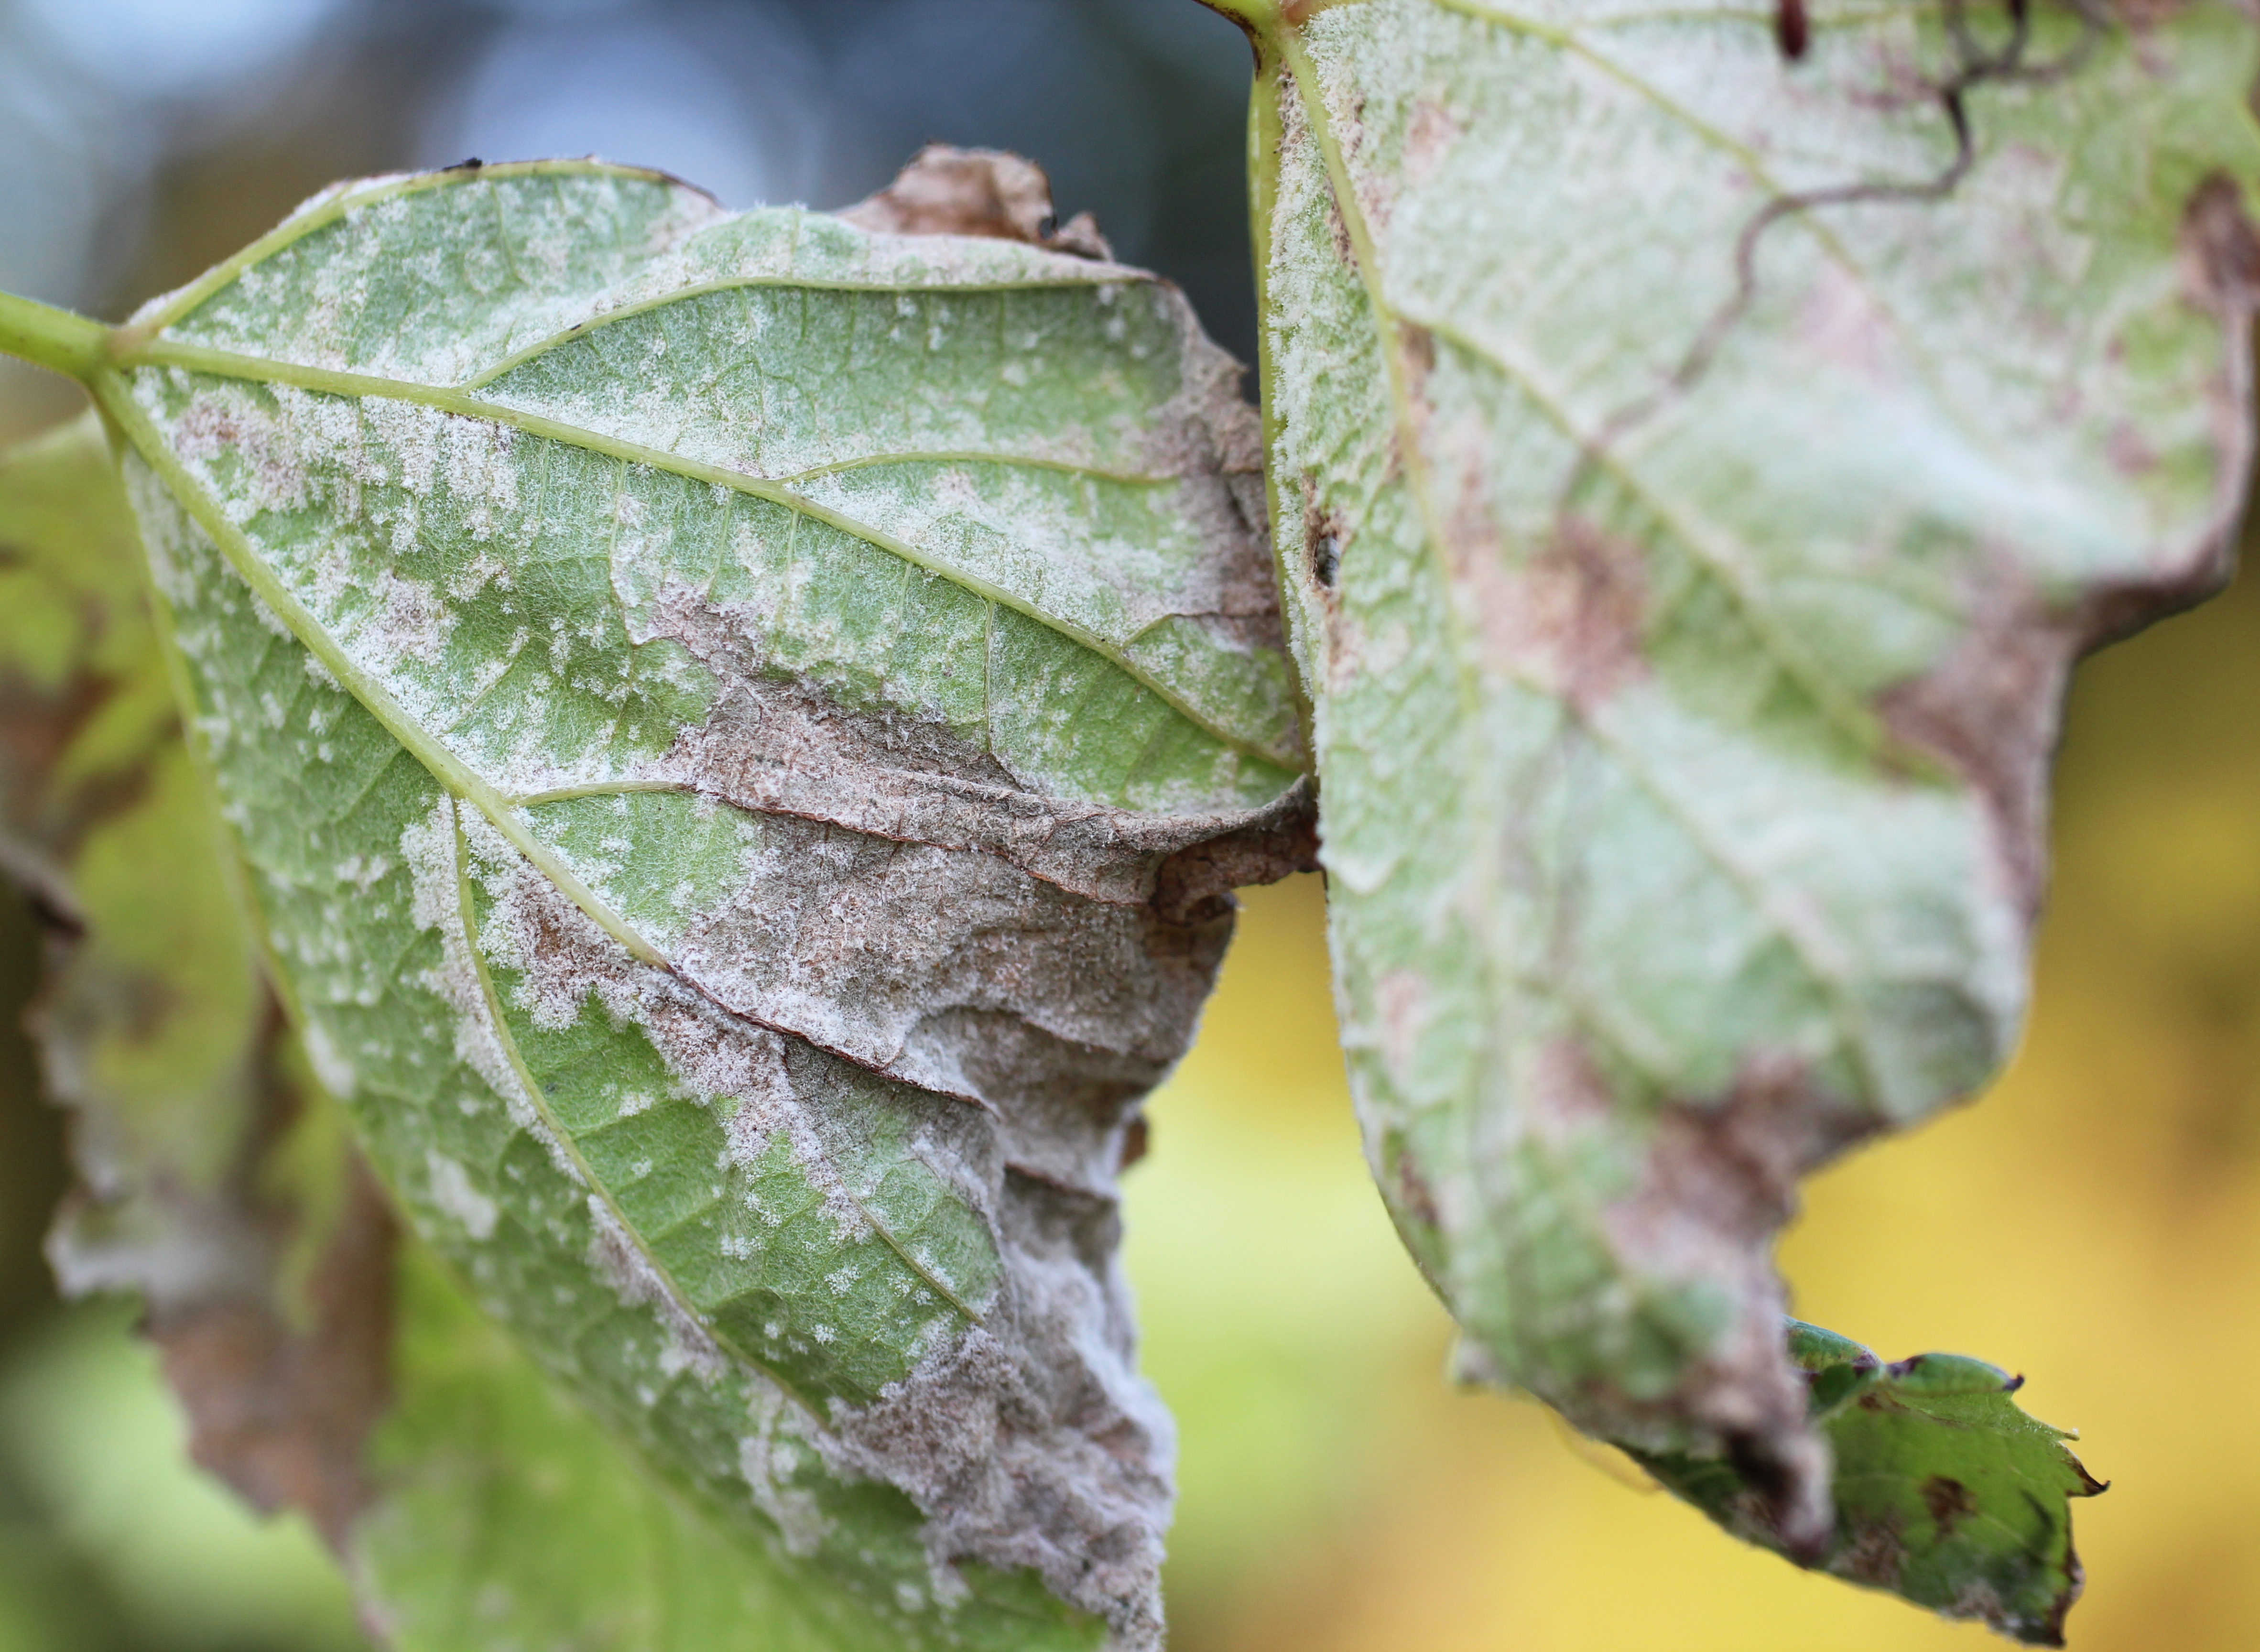 Downy mildew growth on under surface of leaves.  